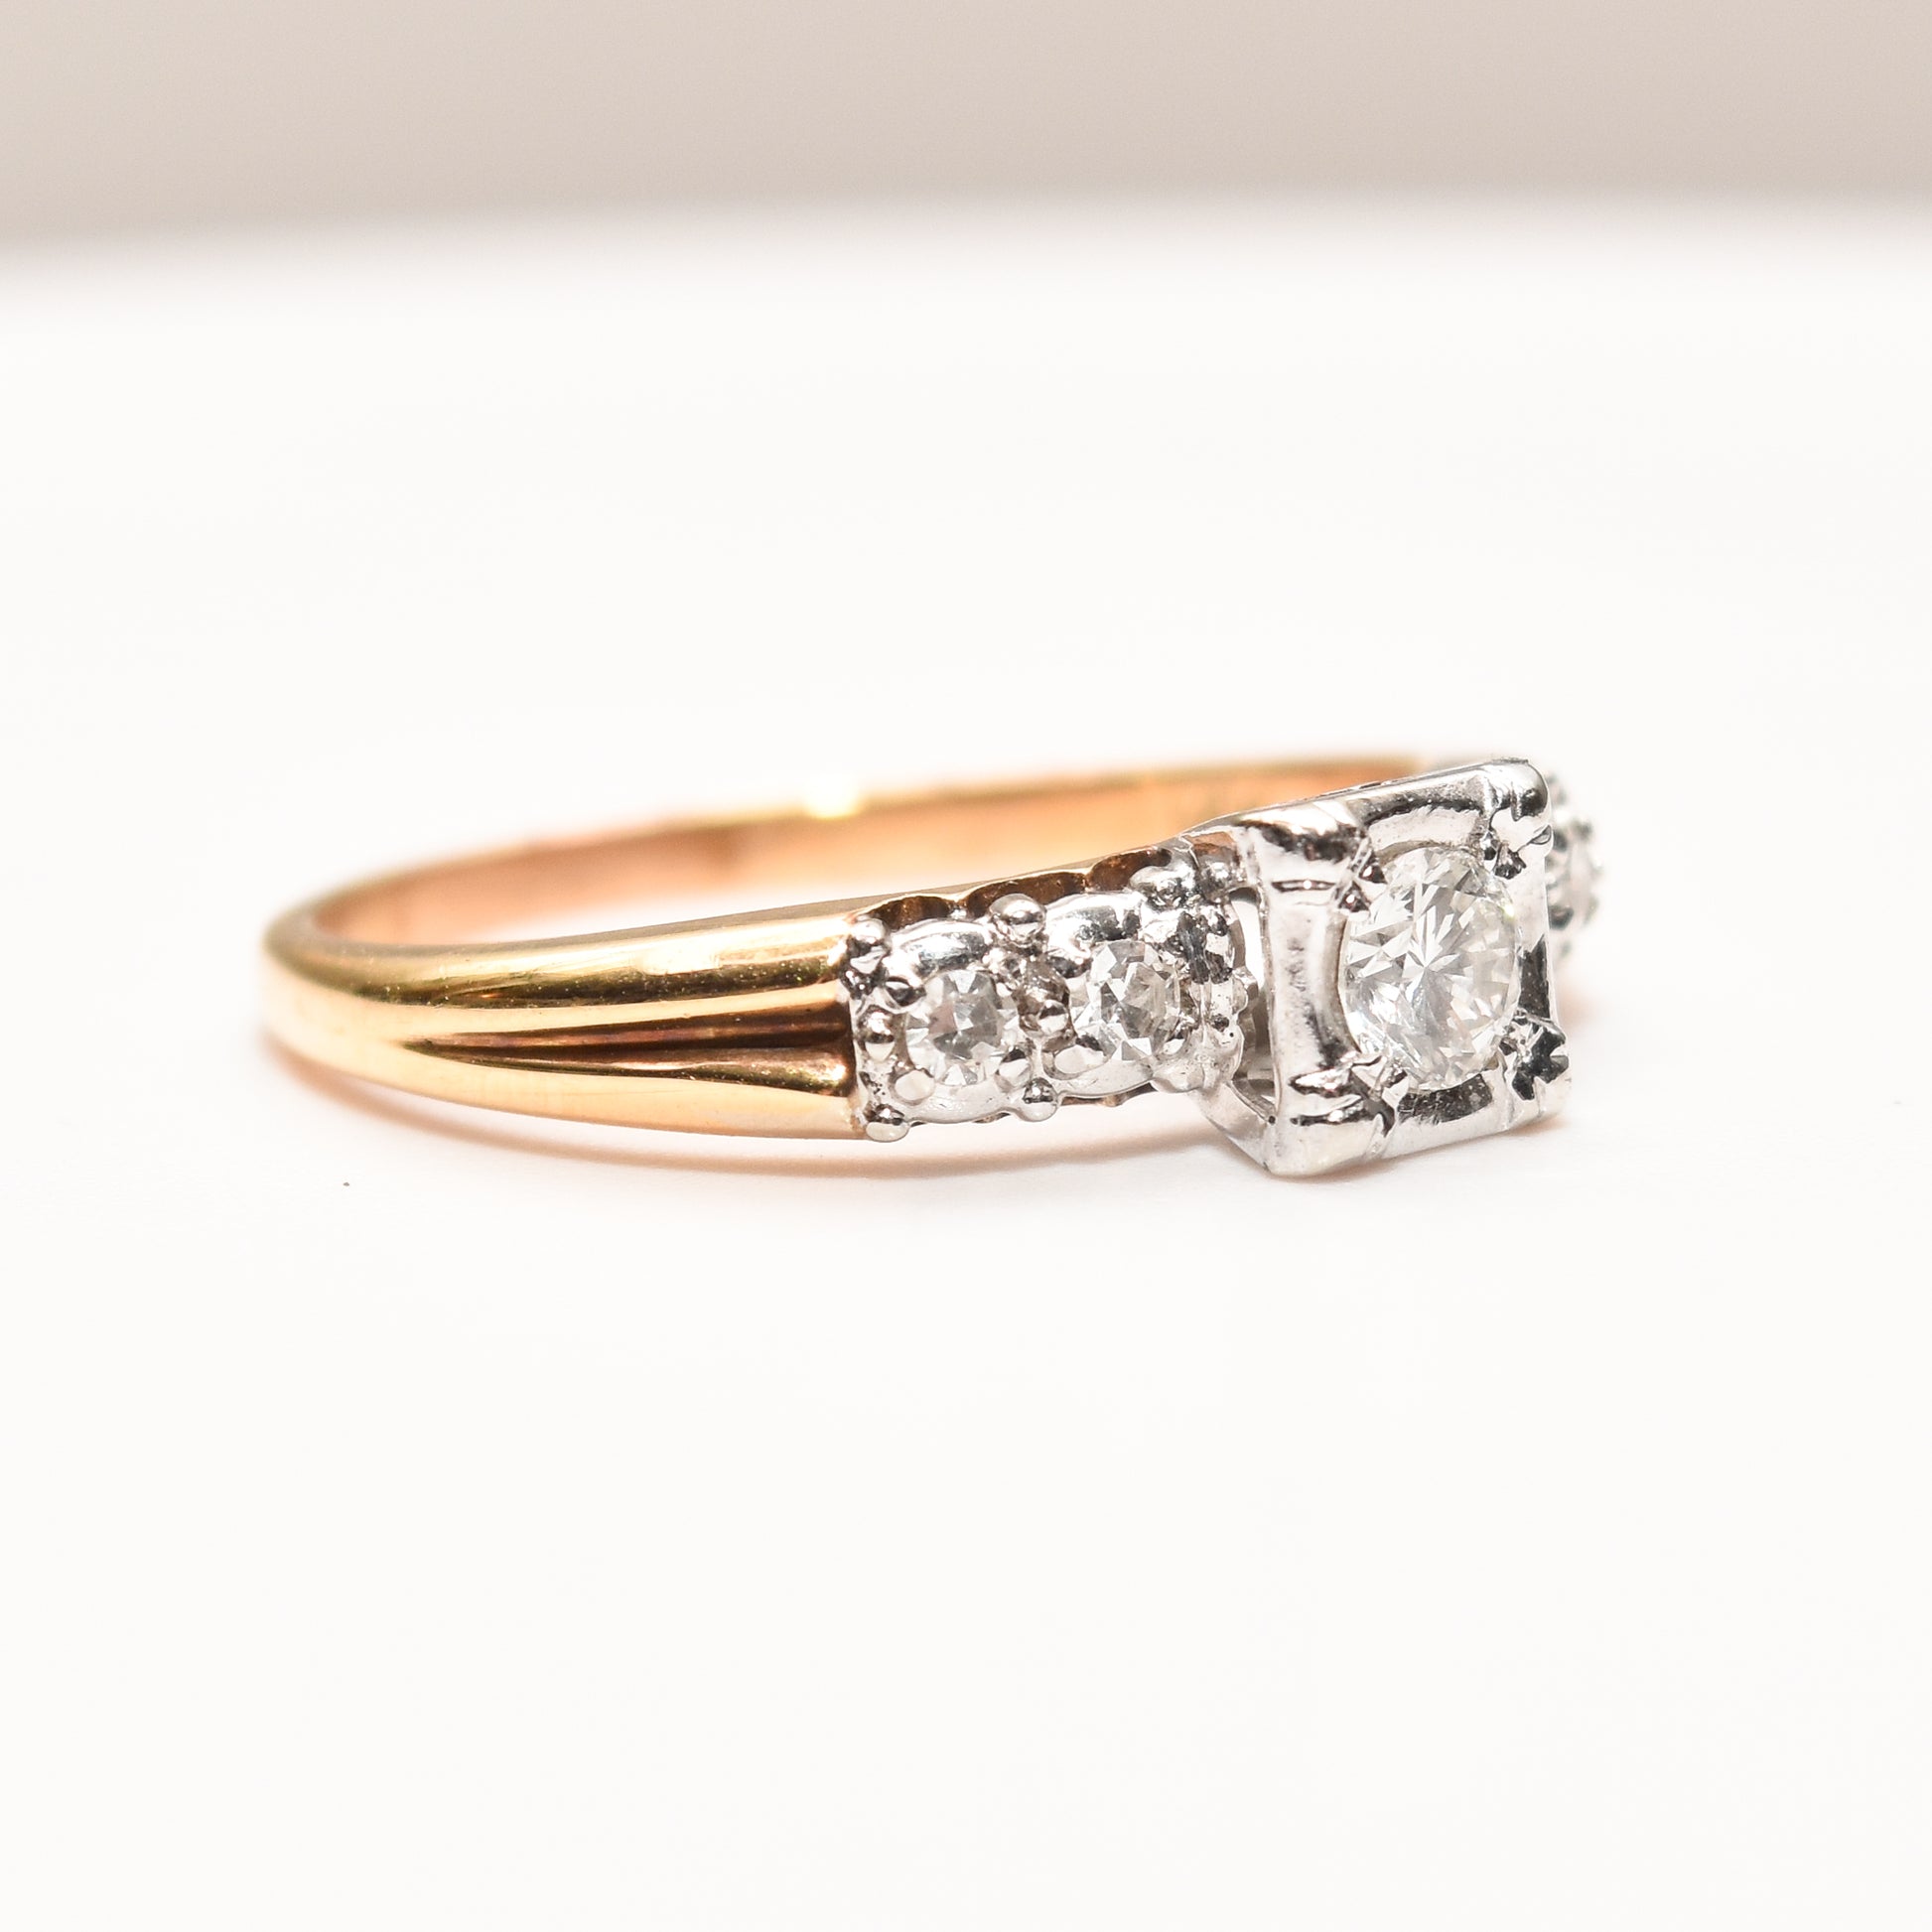 14K Two-Tone Gold Diamond Engagement Ring with .25 Carat Brilliant Center Stone, Size 9, on White Background